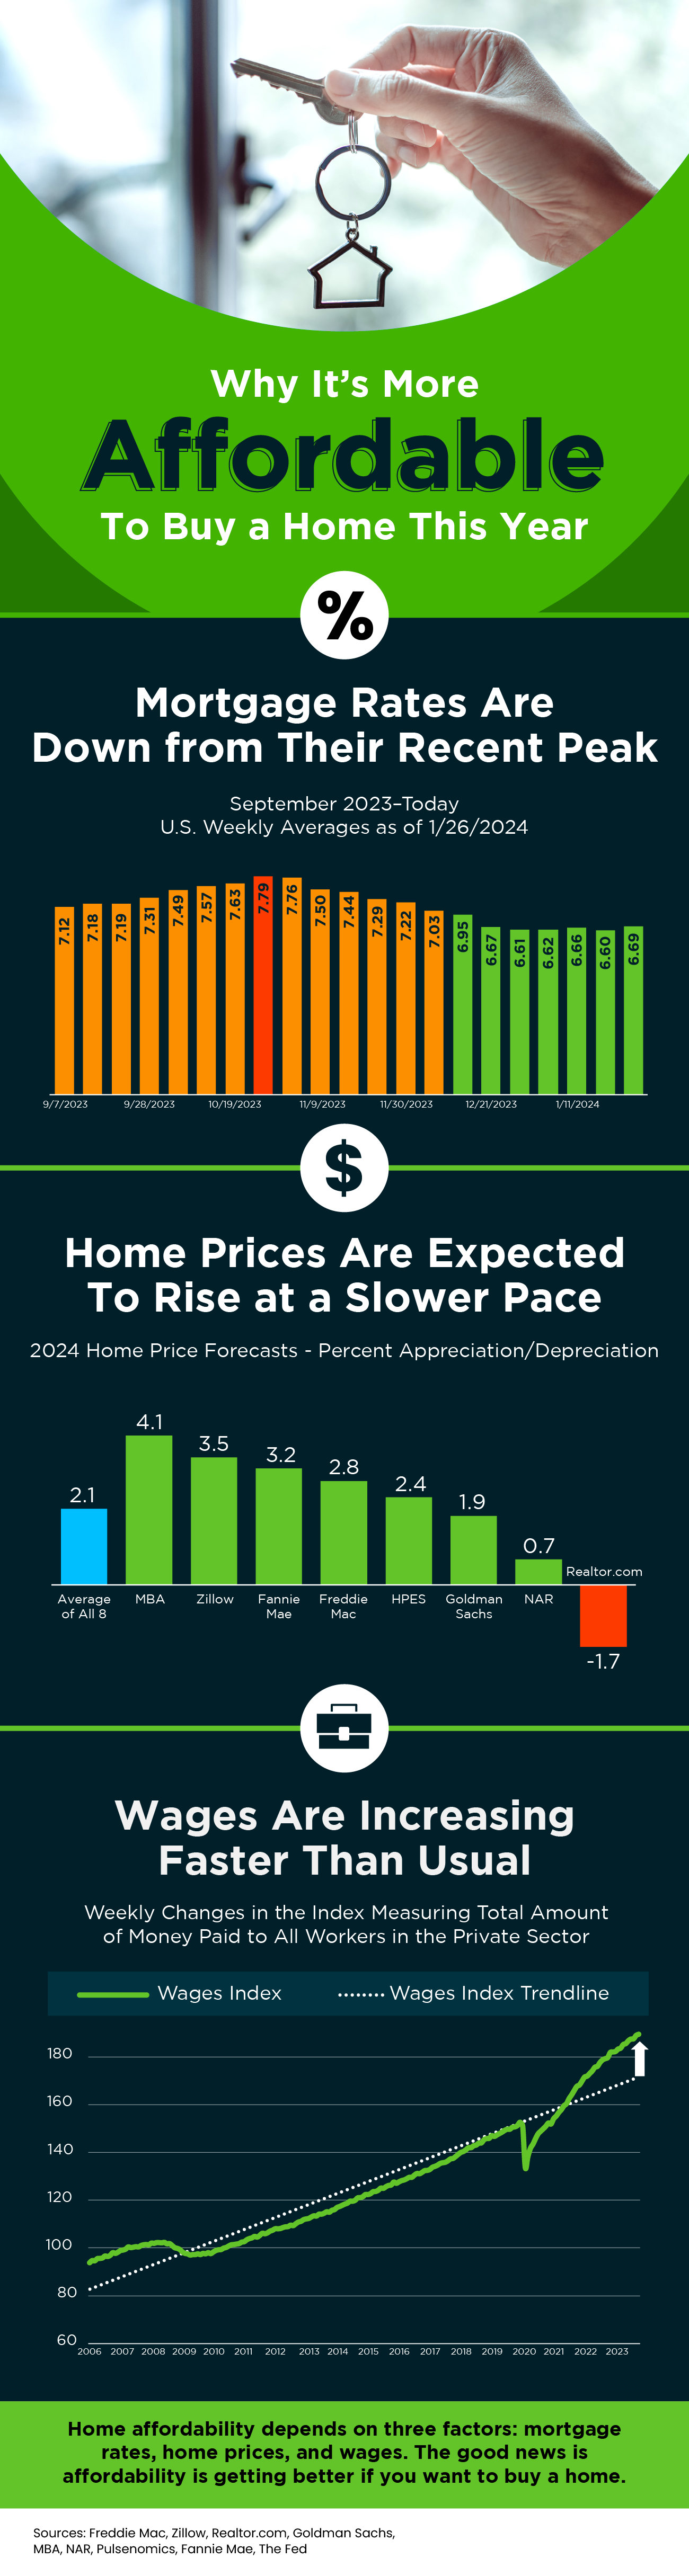 why-its-more-affordable-to-buy-a-home-this-year-infographic